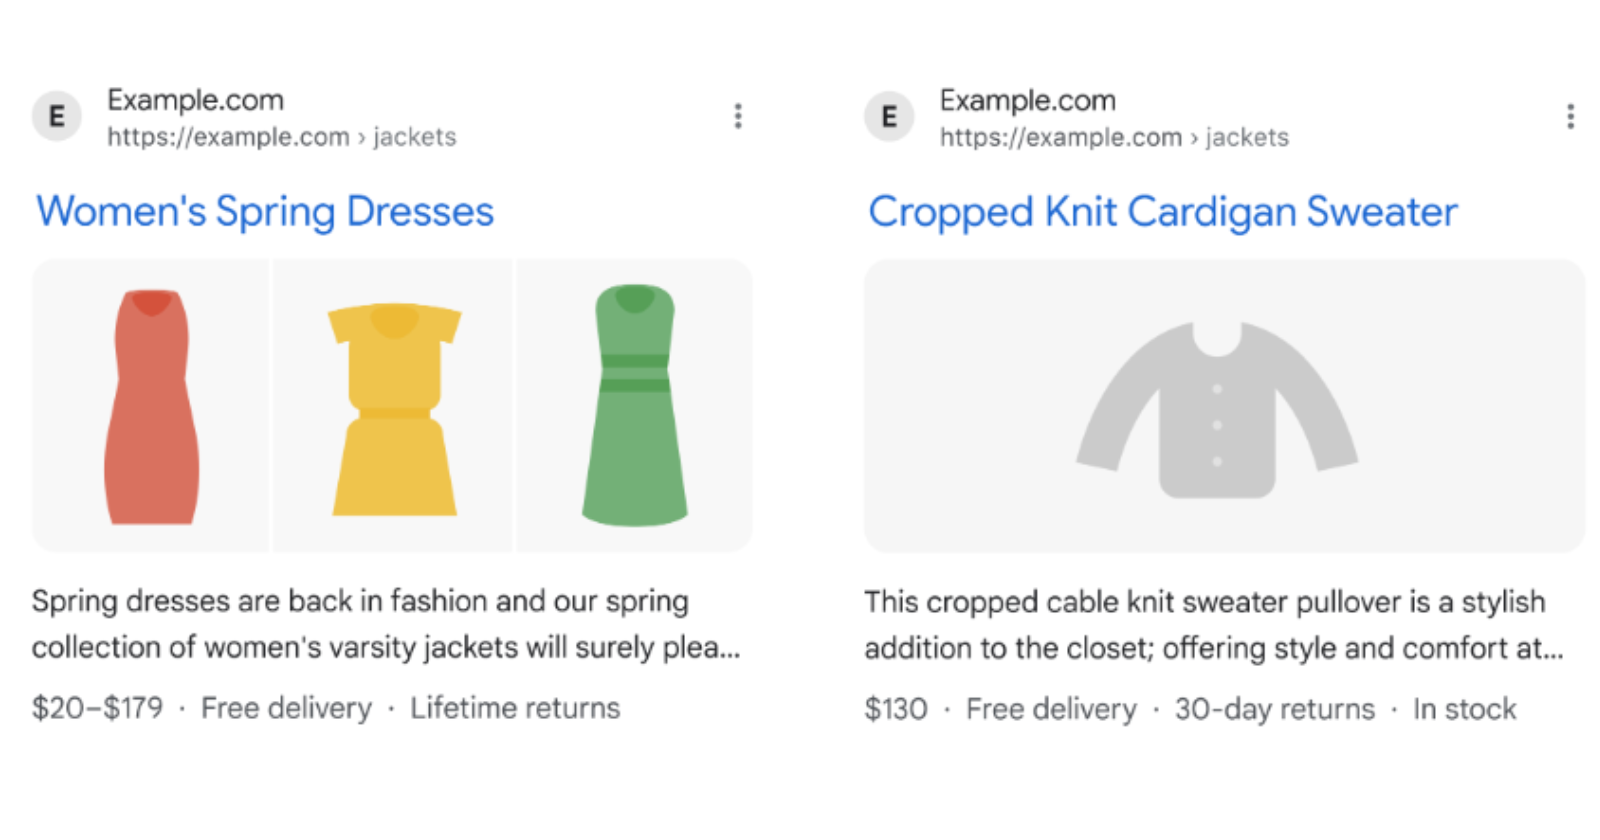 Google Enhances Shipping & Return Info In Search Results